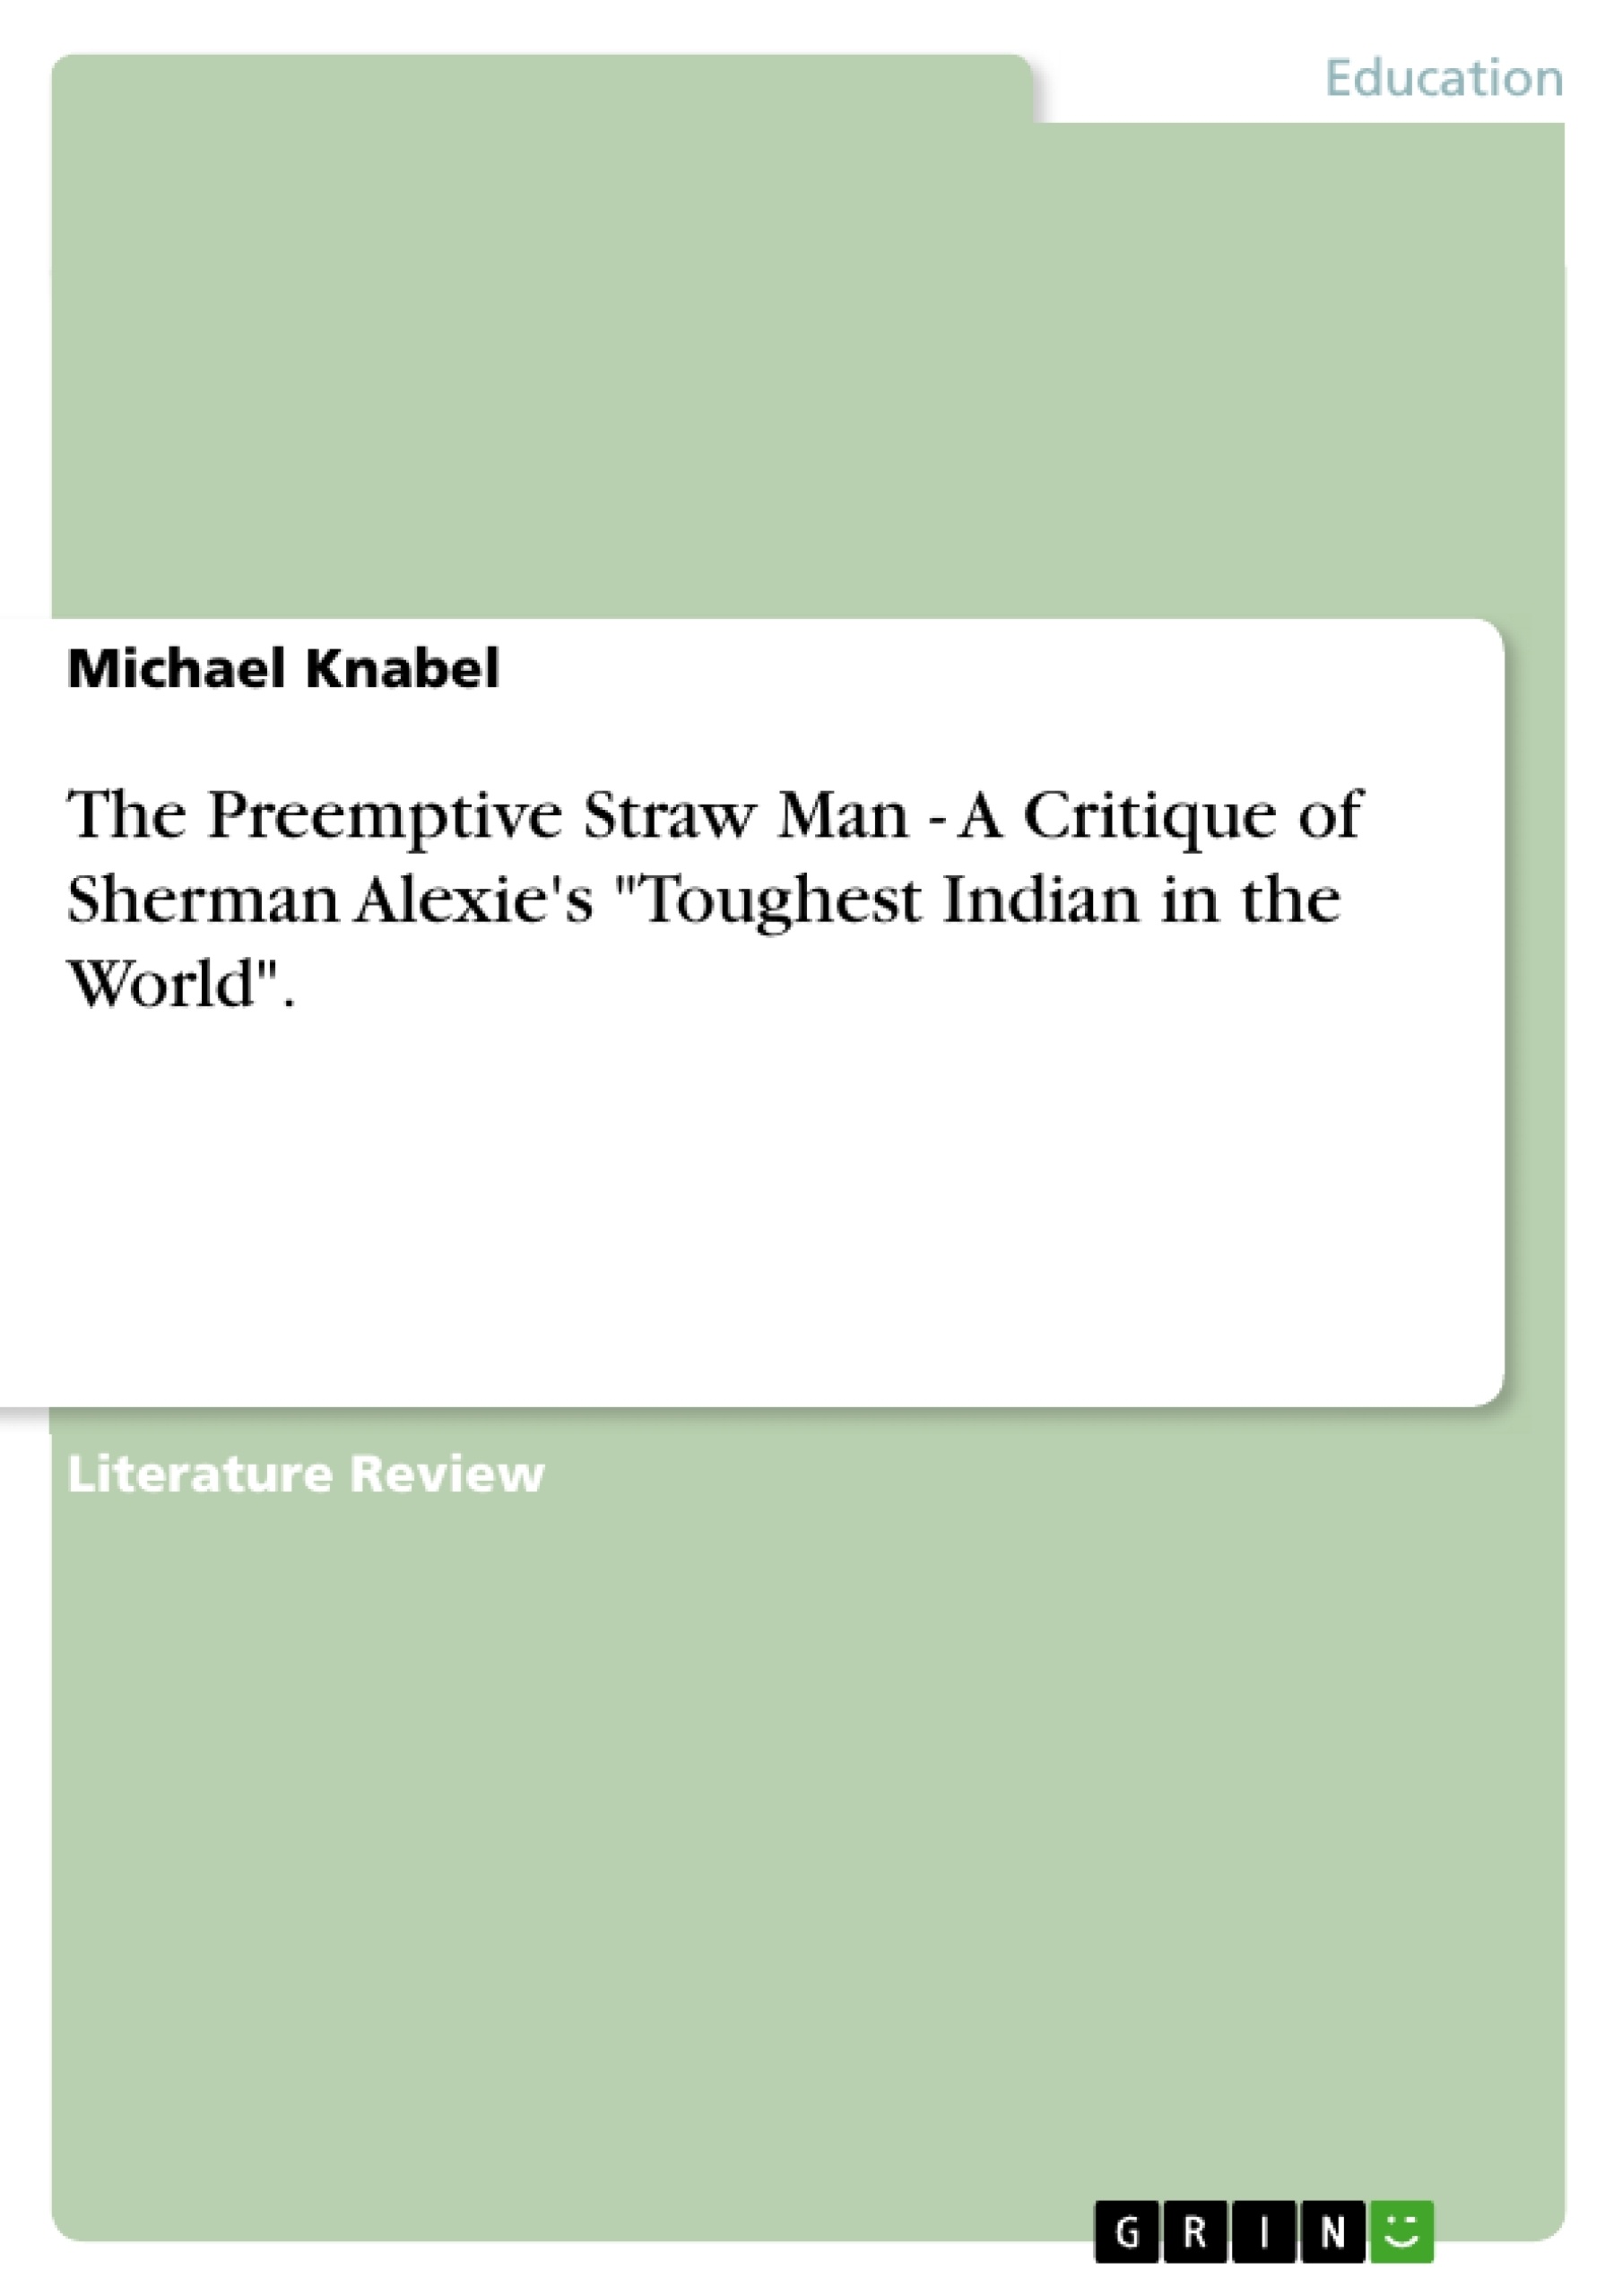 Title: The Preemptive Straw Man - A Critique of Sherman Alexie's "Toughest Indian in the World".